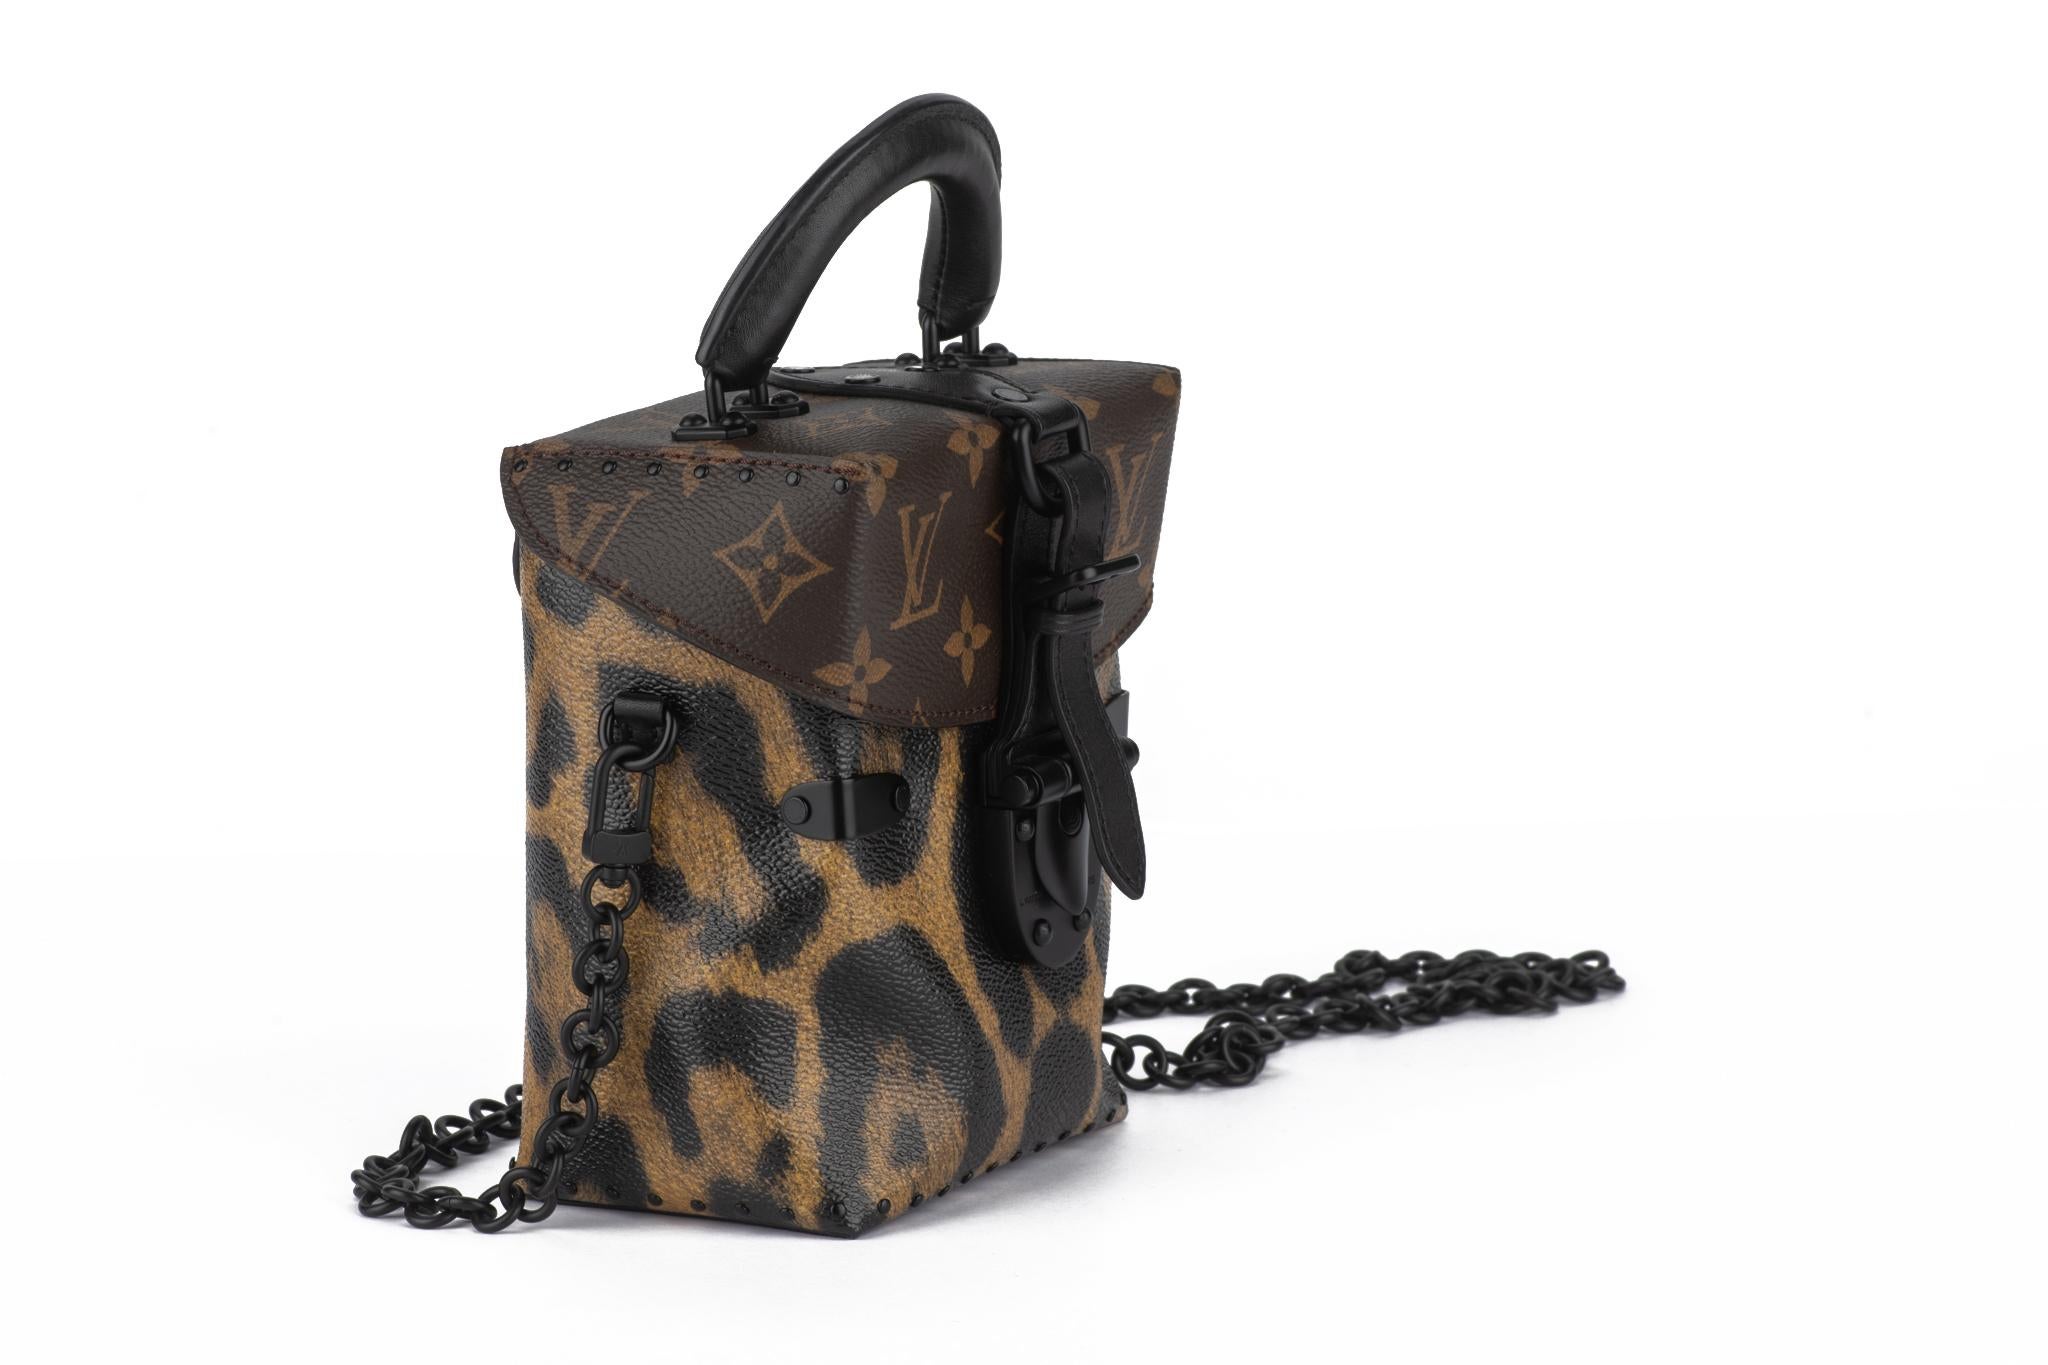 The Louis Vuitton Monogram and Wild Animal Print Camera Box is made of a coated canvas and black leather trim/metallic hardware. It features a black Toron handle and removable adjustable shoulder/crossbody strap. The interior has one slip